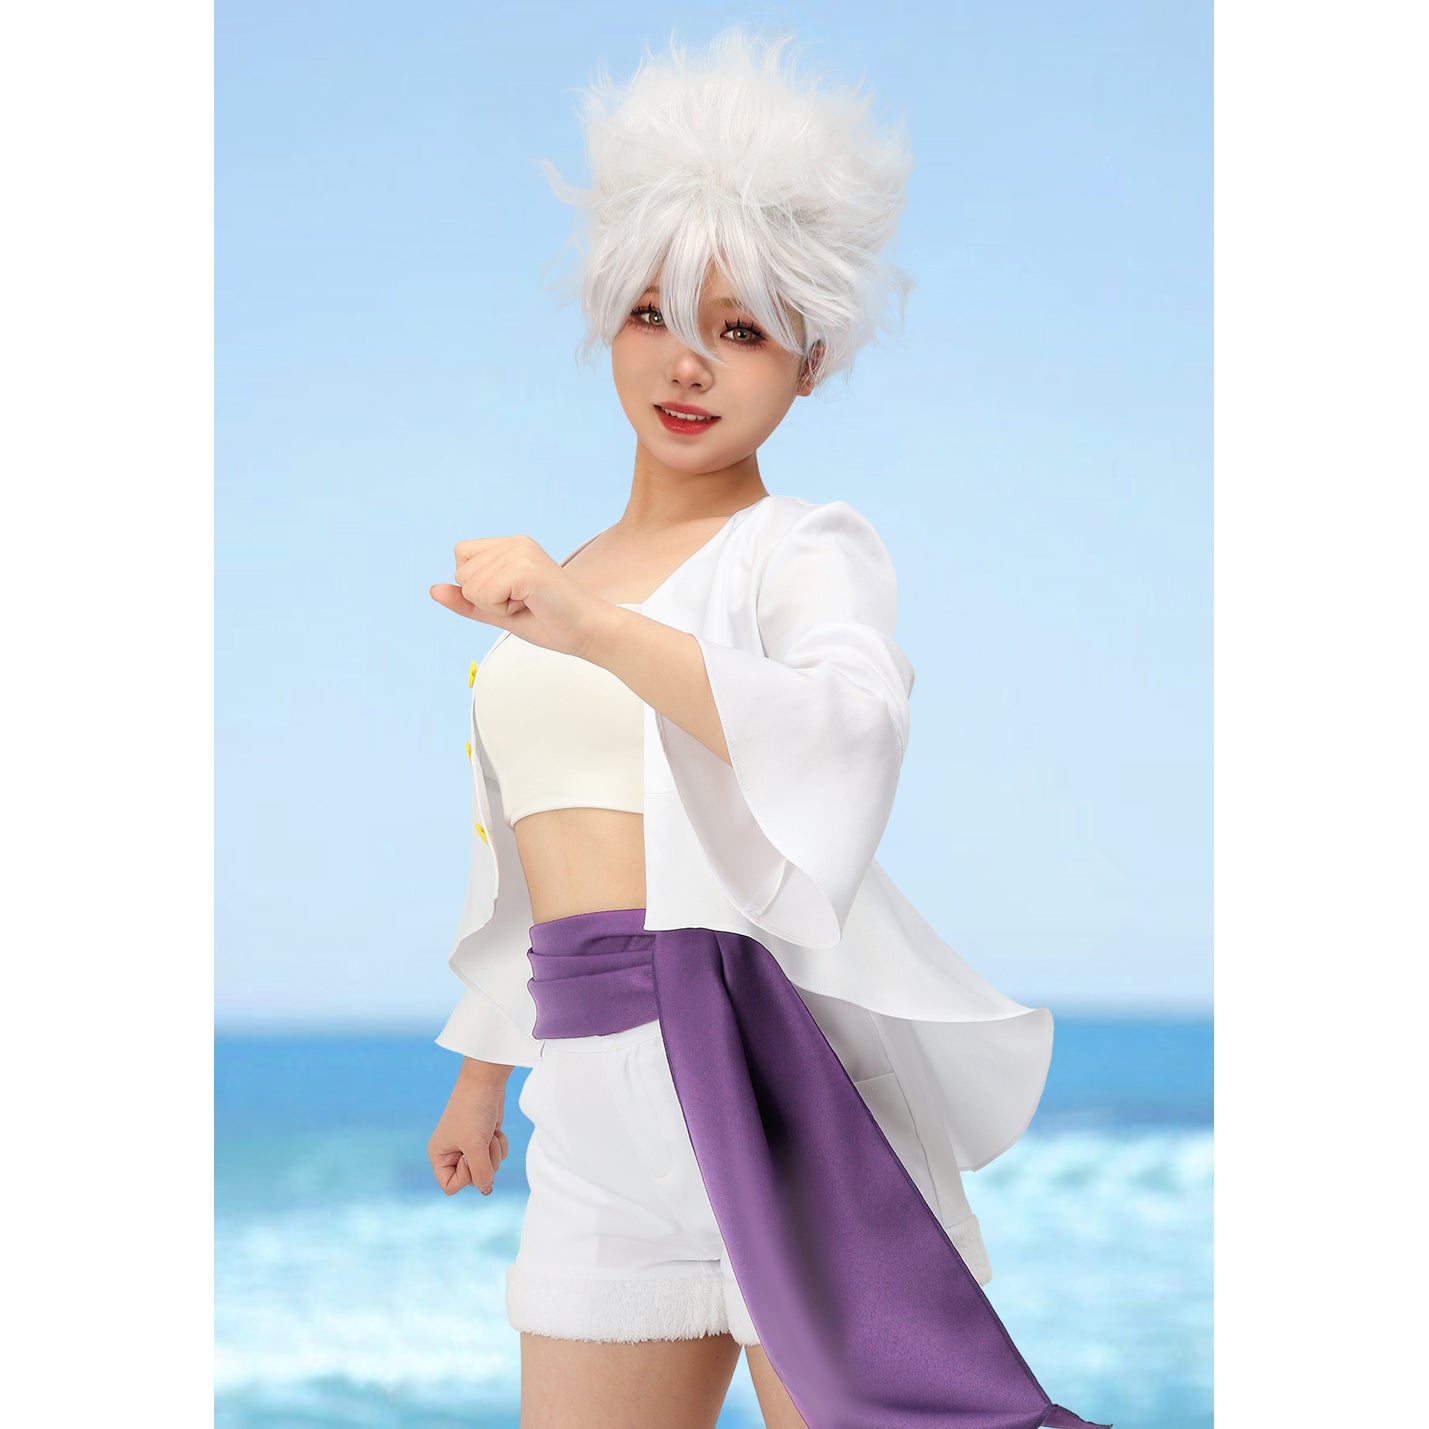 Luffy Gear 5 Female Version Cosplay Costume Outfit White Shirt Pants and Purple Sash